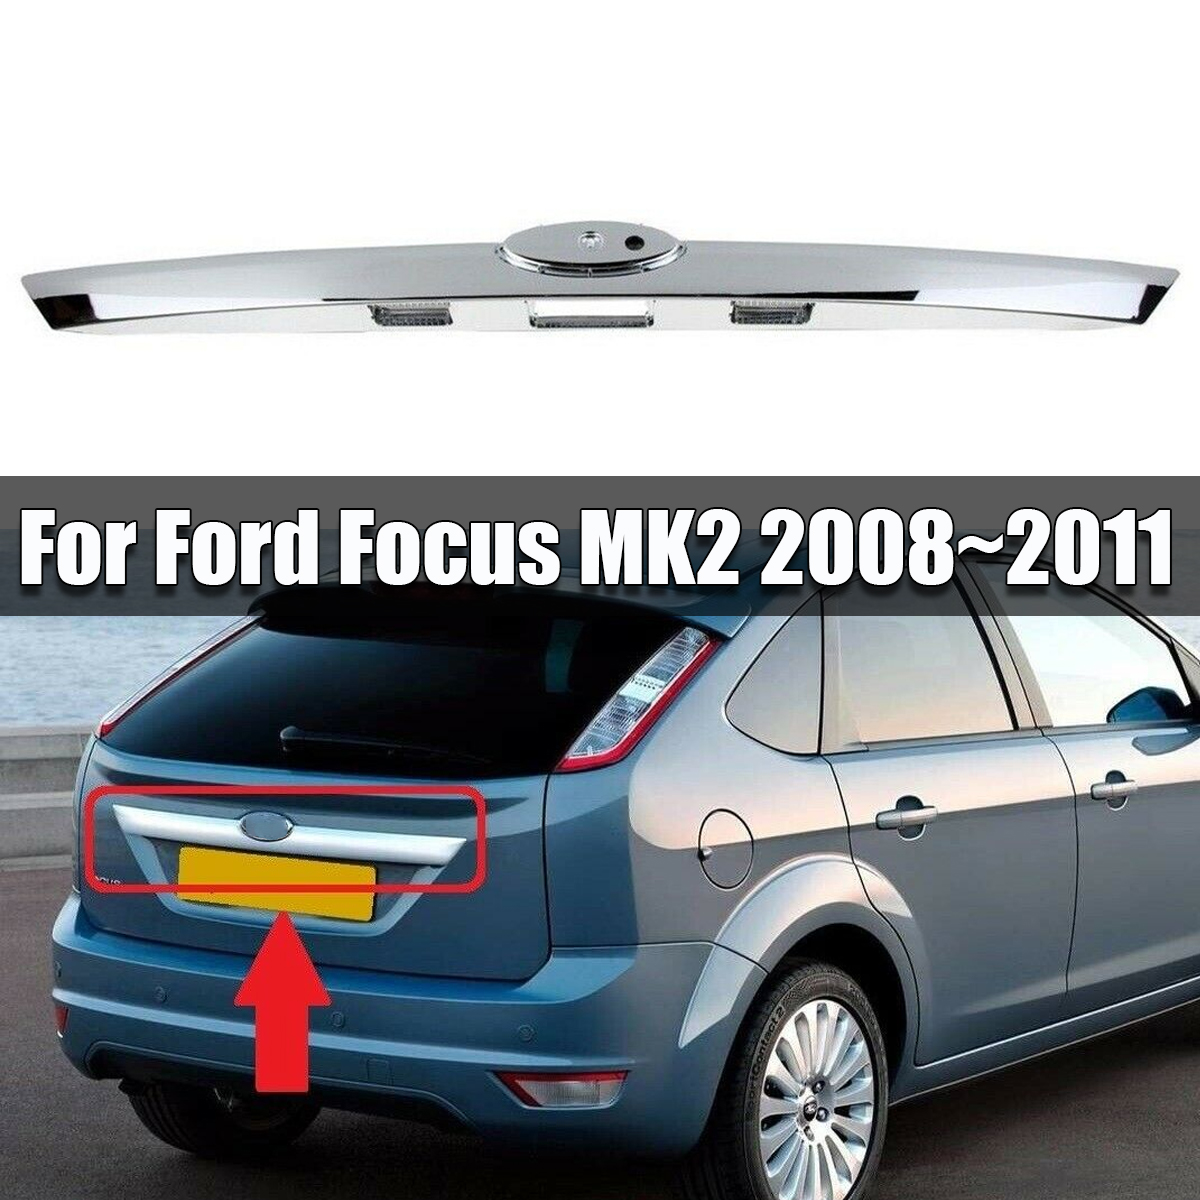 Chrome-Rear-Tailgate-Boot-Strip-Handle-For-Ford-Focus-MK2-Hatchback-20082011-1749792